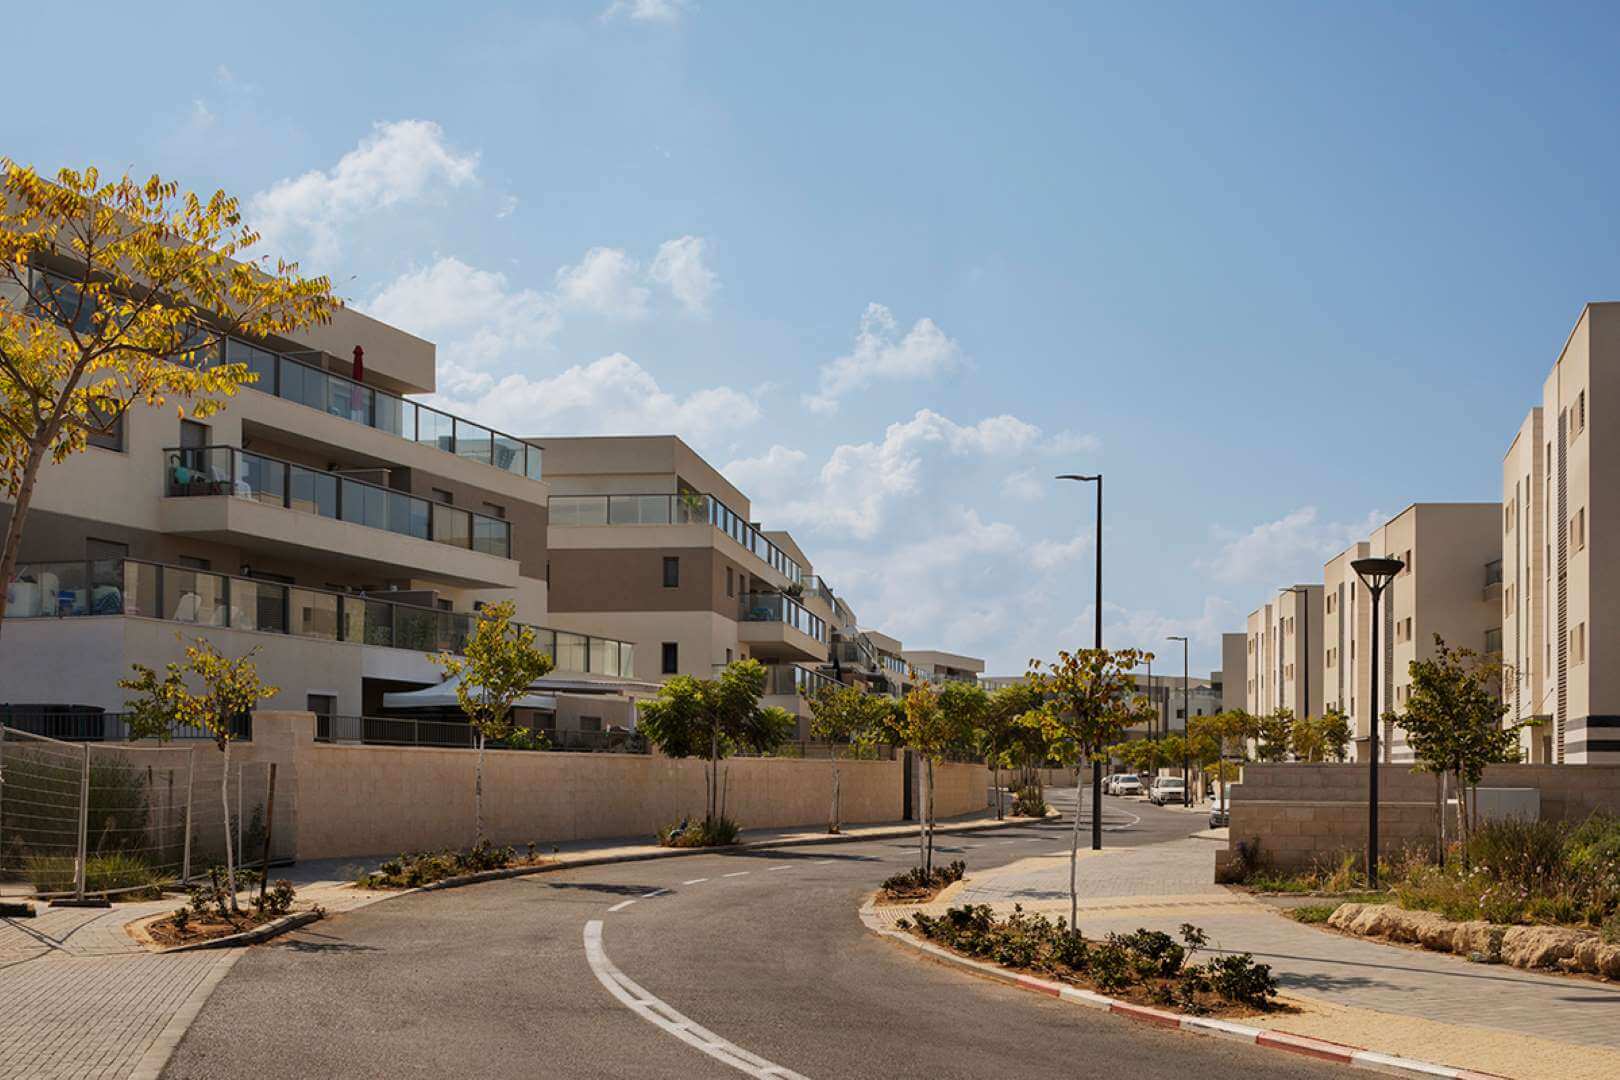 Photograph of buildings from the UNIK&MORE project in Atlit